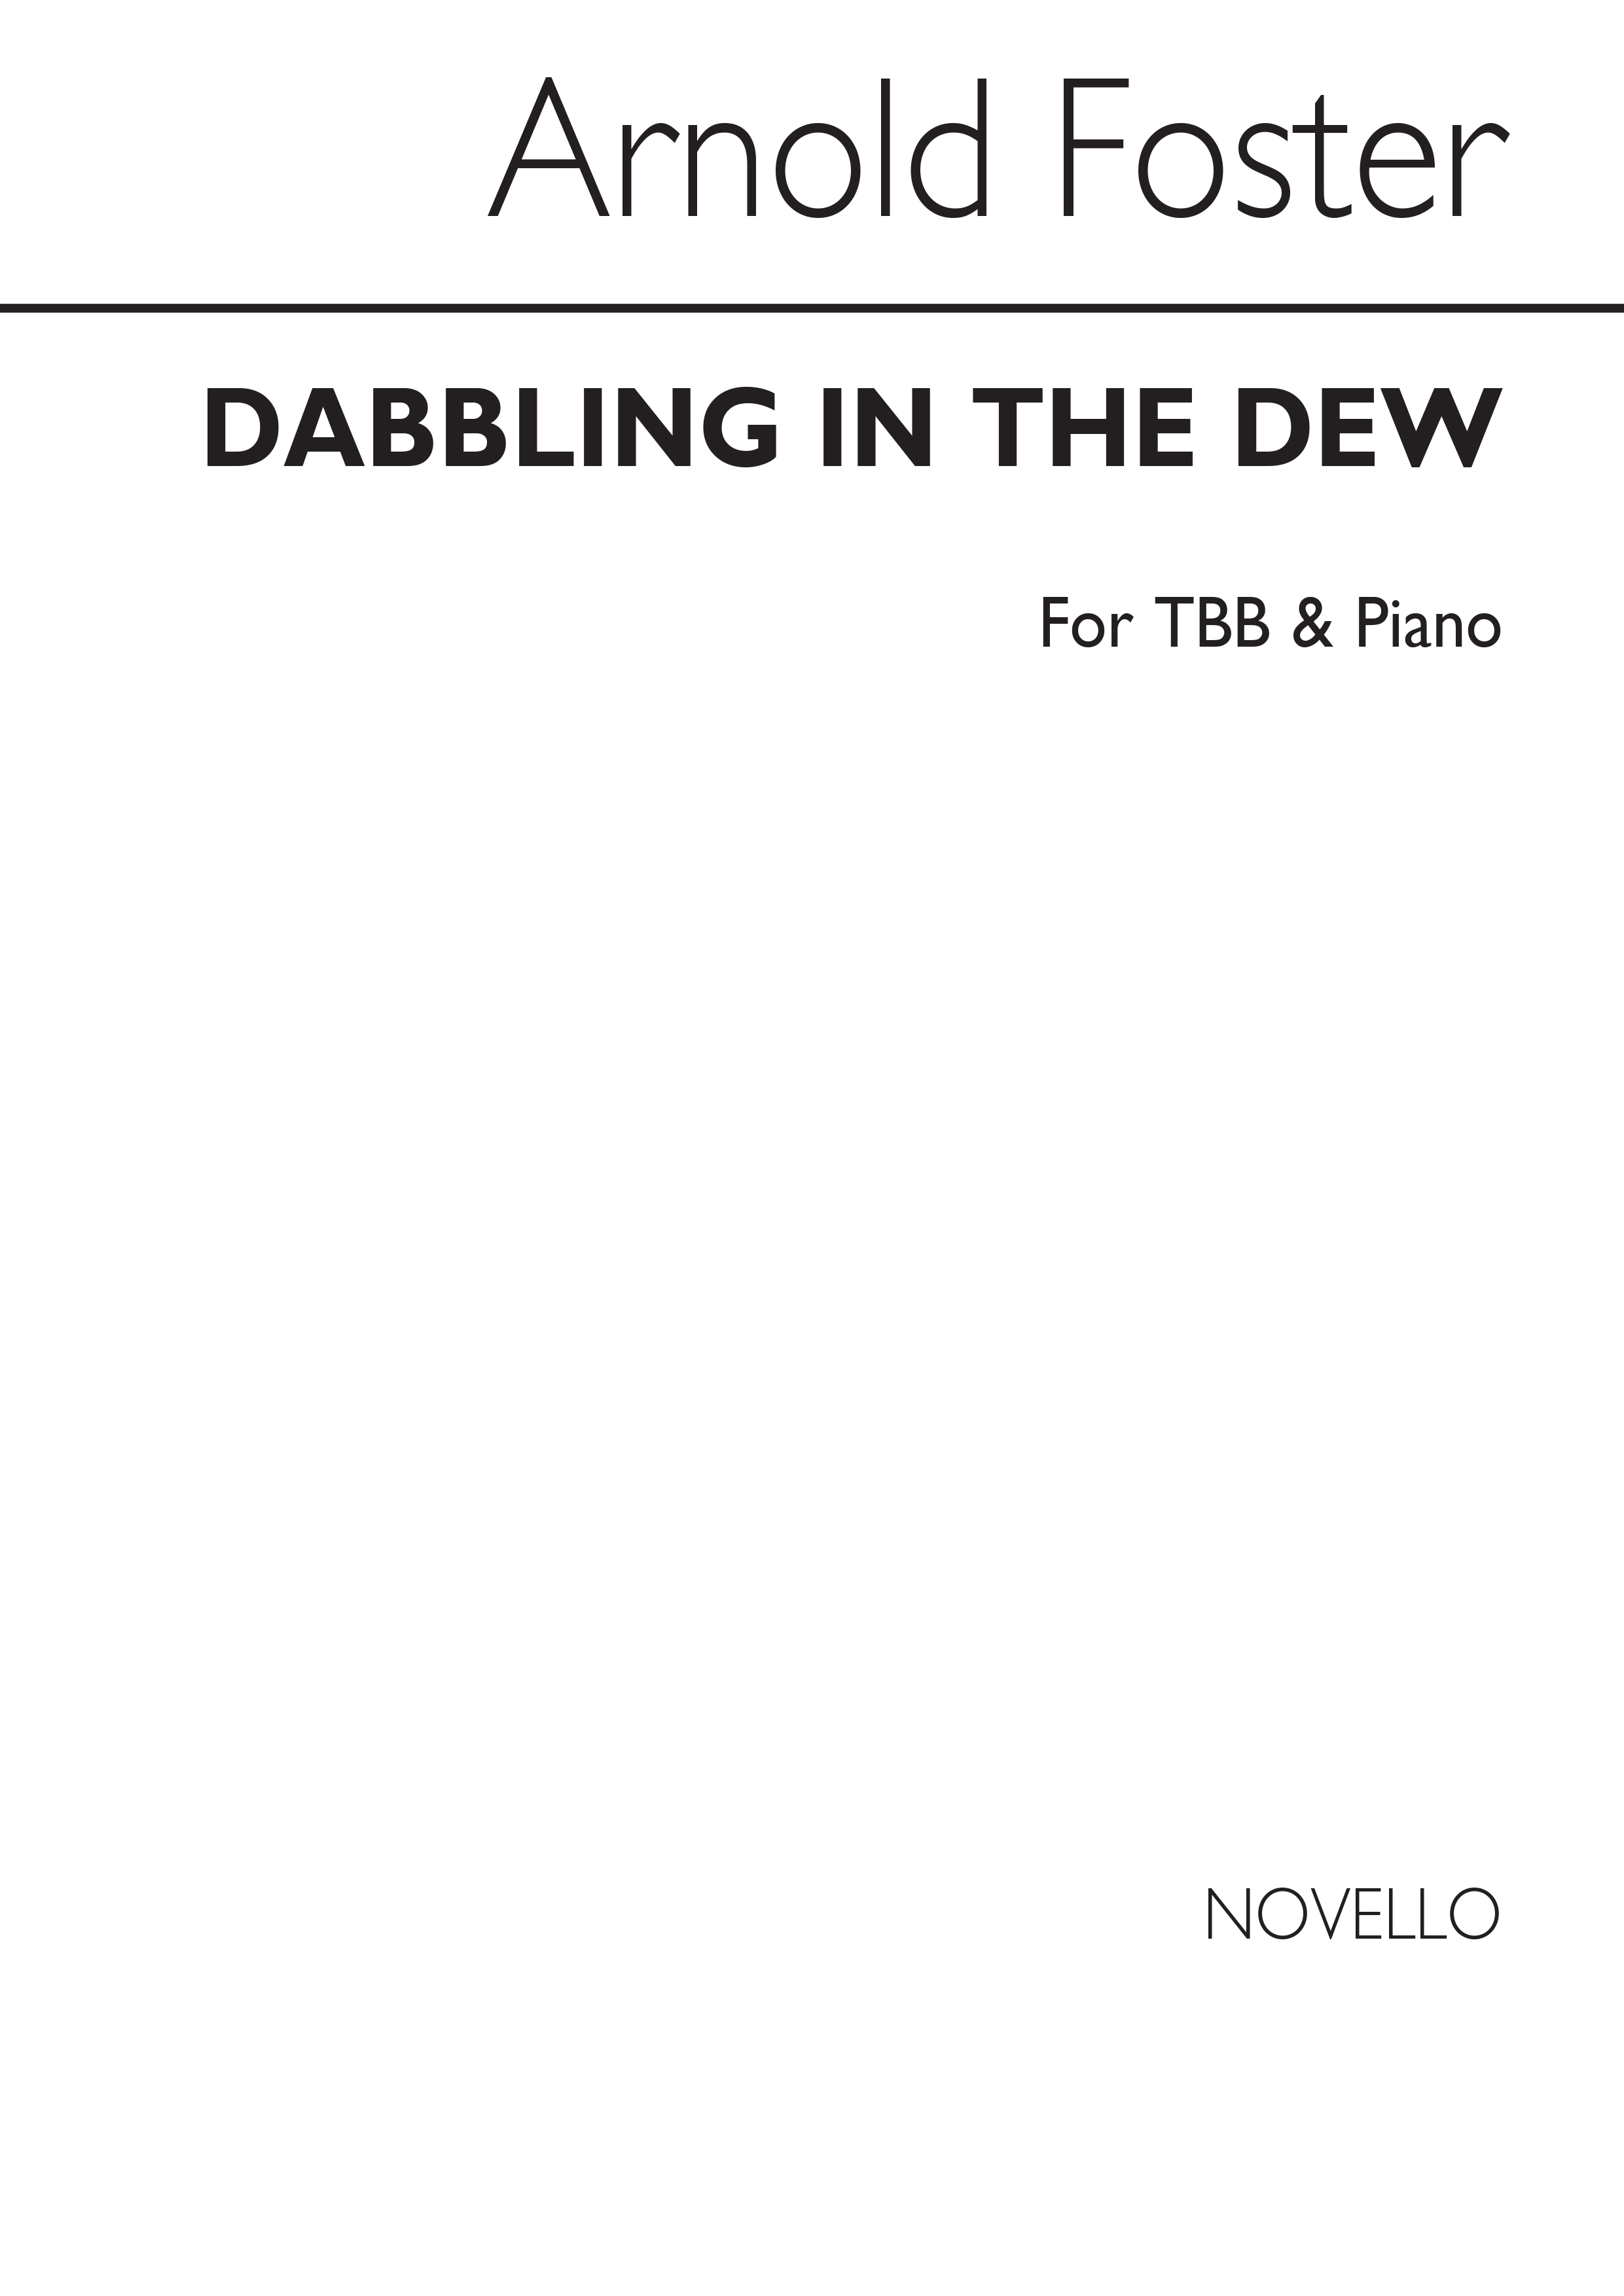 Arnold Foster: Dabbling In The Dew